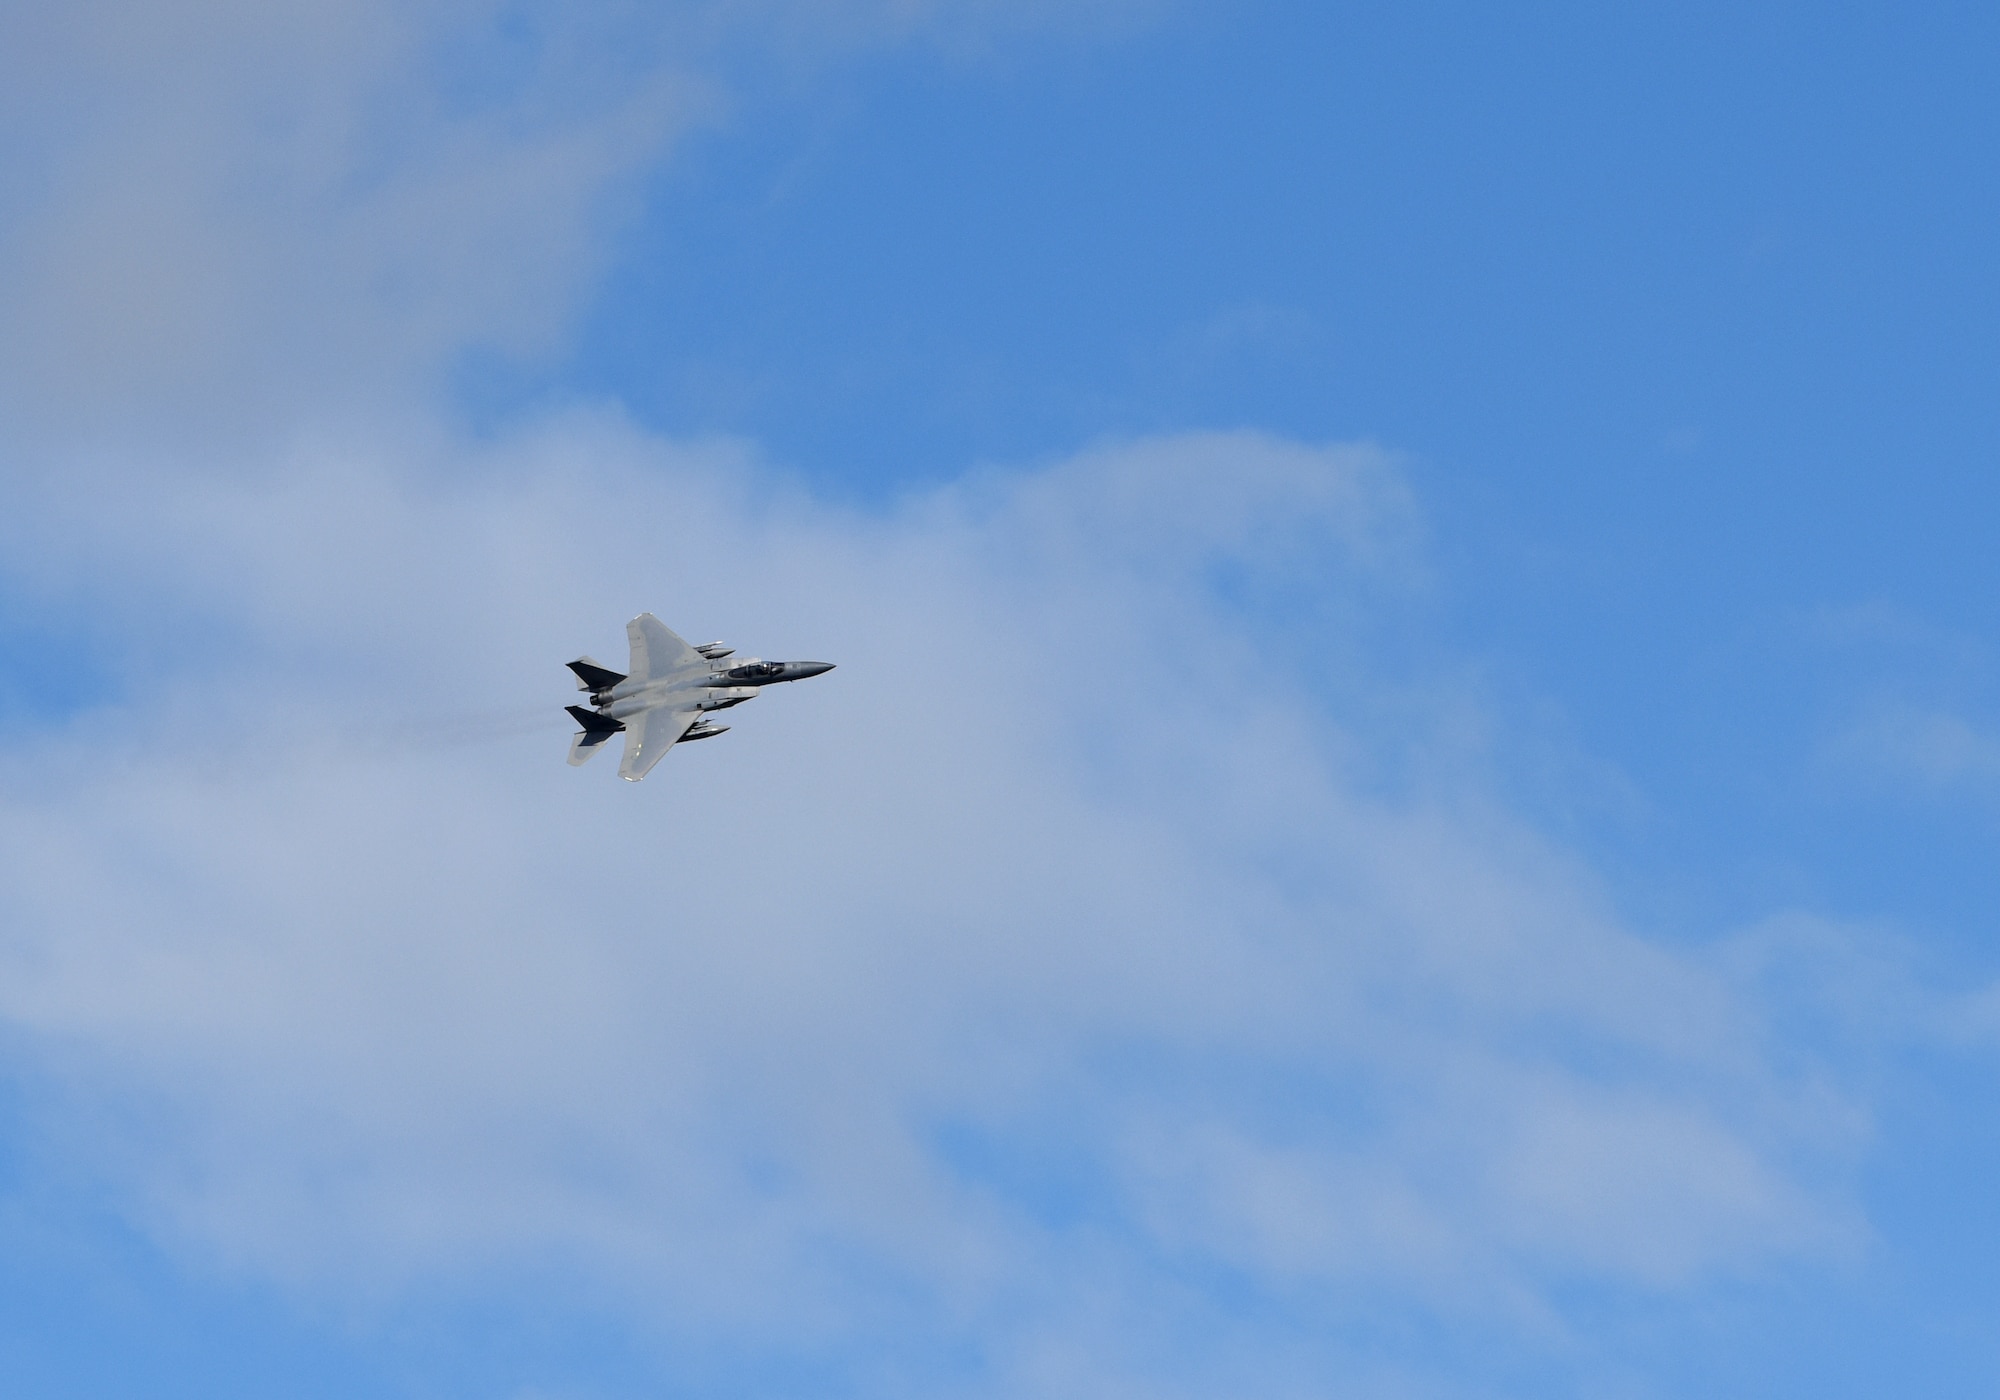 An F-15C Eagle assigned to the 493rd Expeditionary Fighter Squadron flies over Keflavik Air Base, Iceland, July 30, 2018 in support of NATO’s Icelandic Air Surveillance mission. The United States has been participating in this IAS mission since 2008, and routinely trains with its European counterparts. (U.S. Air Force photo/ Staff Sgt. Alex Fox Echols III)